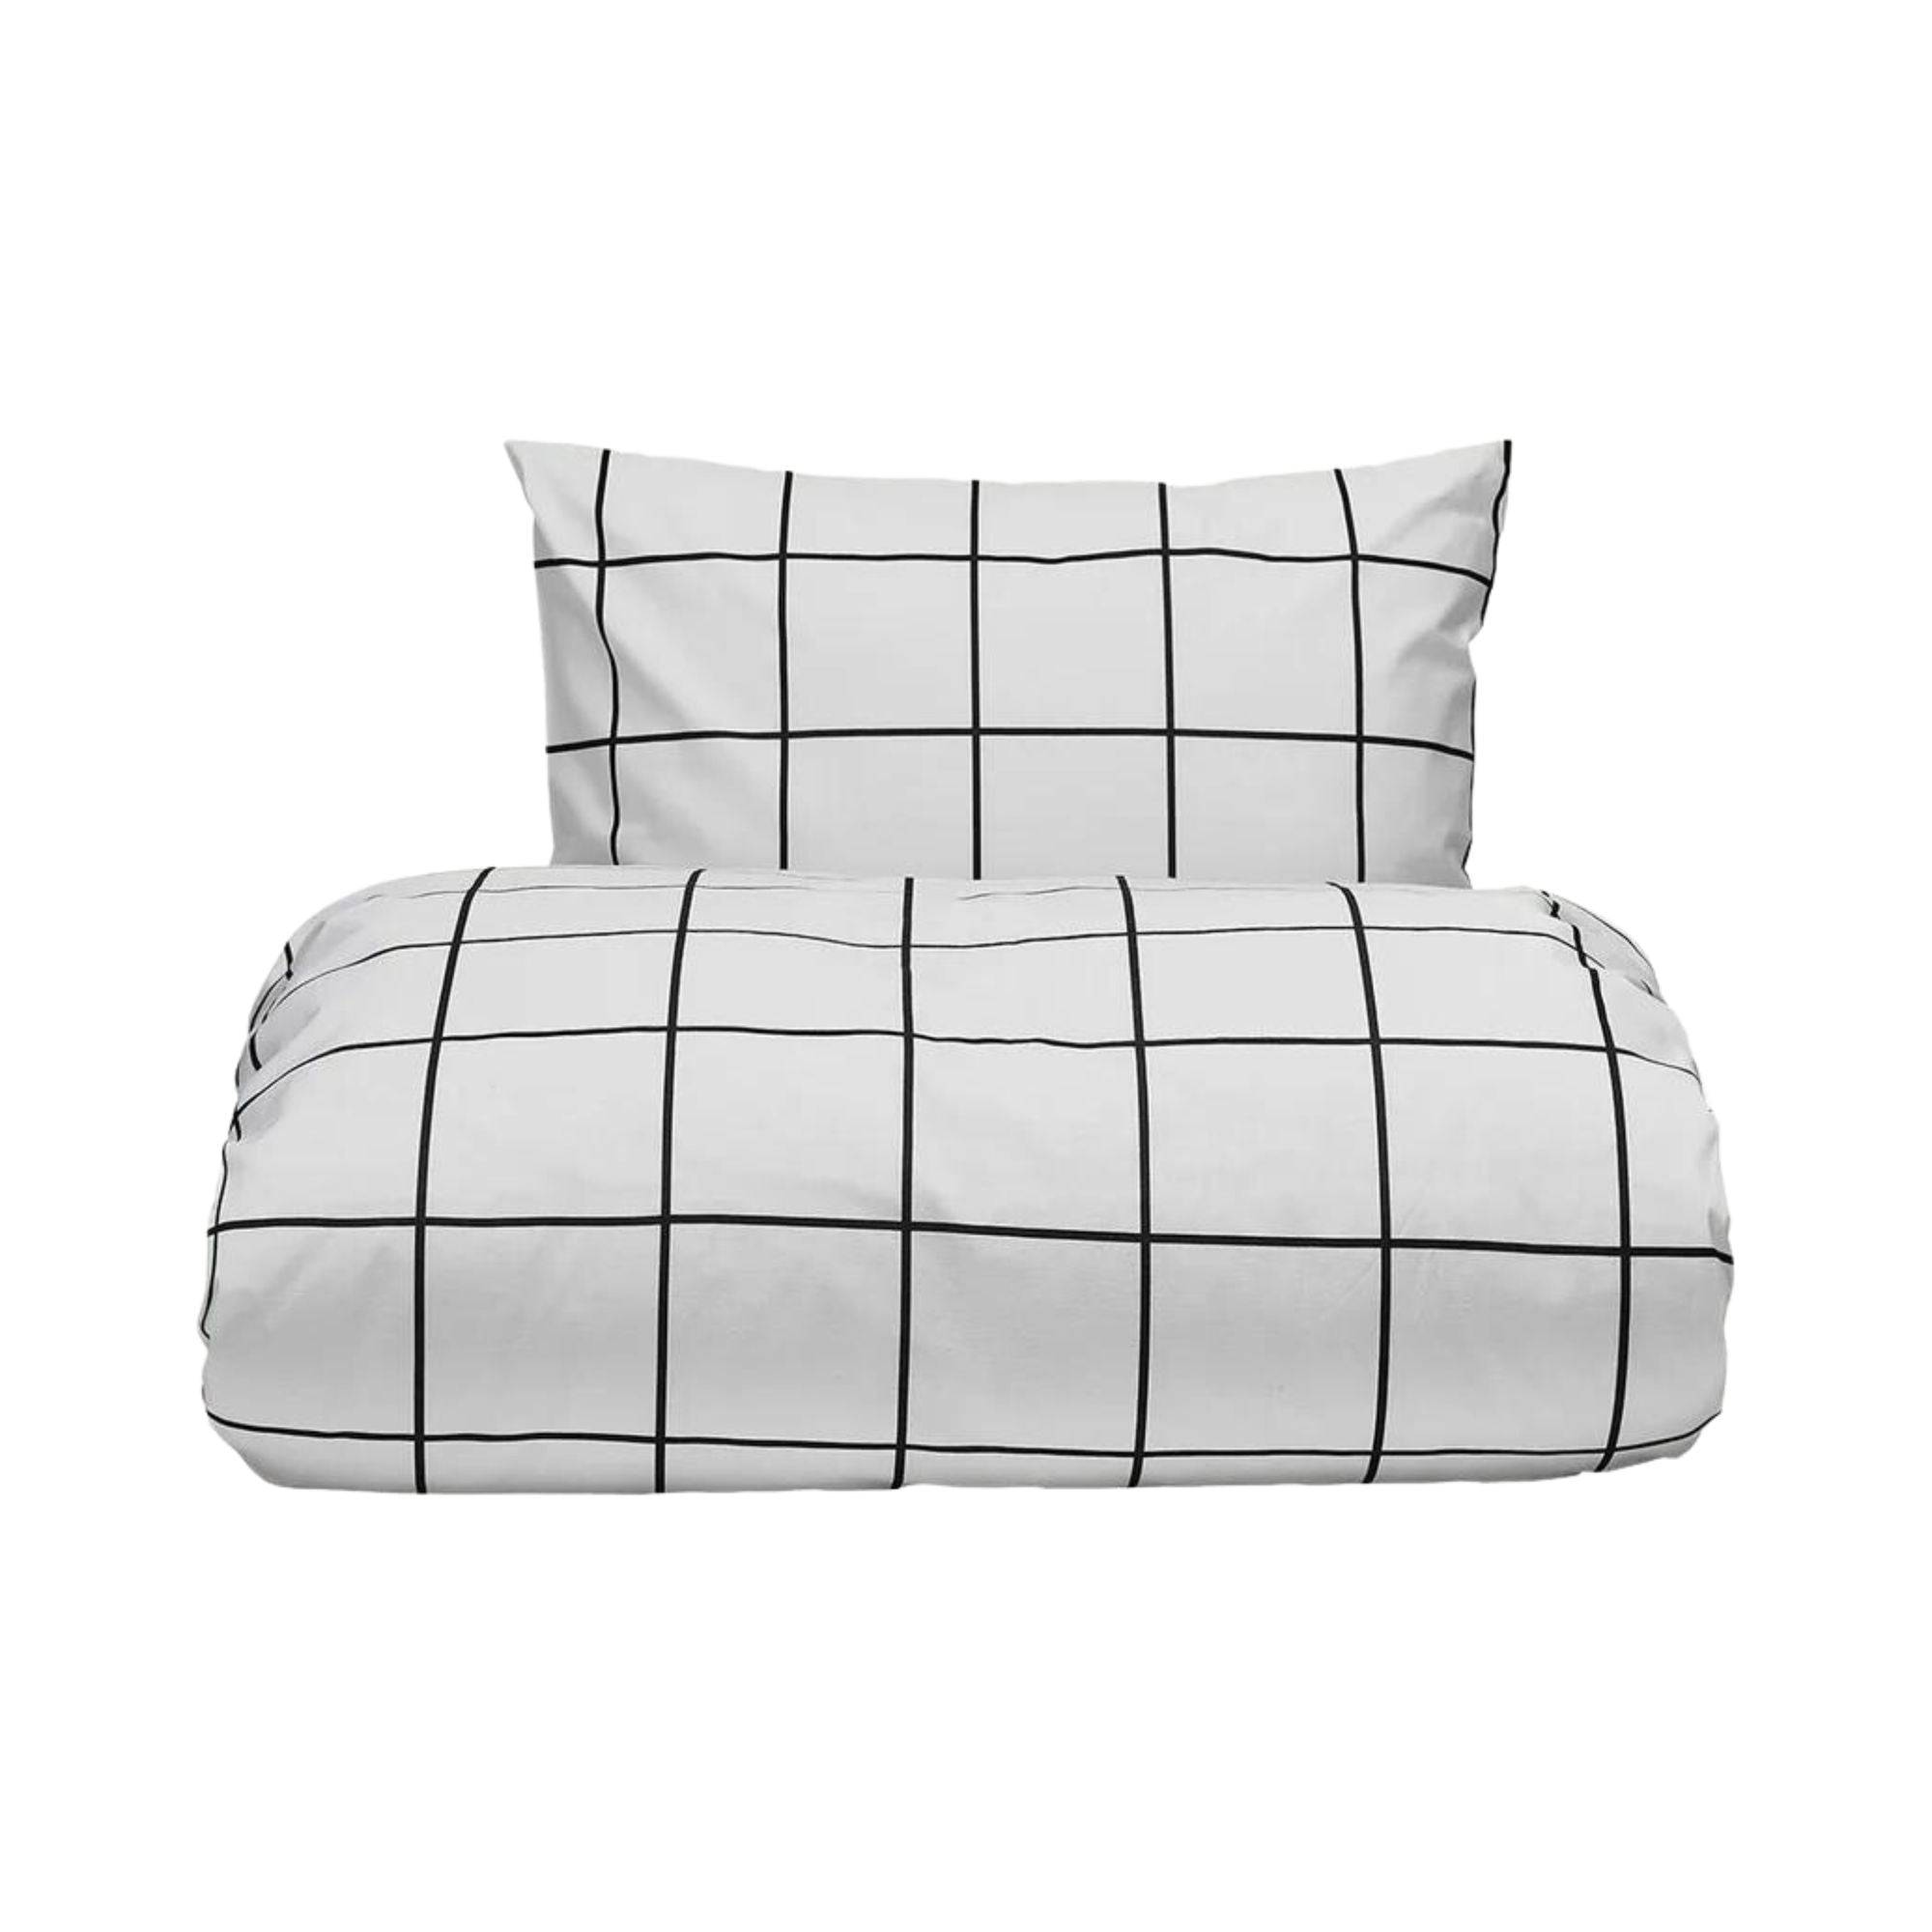 Loma Bed Linen Set - THAT COOL LIVING